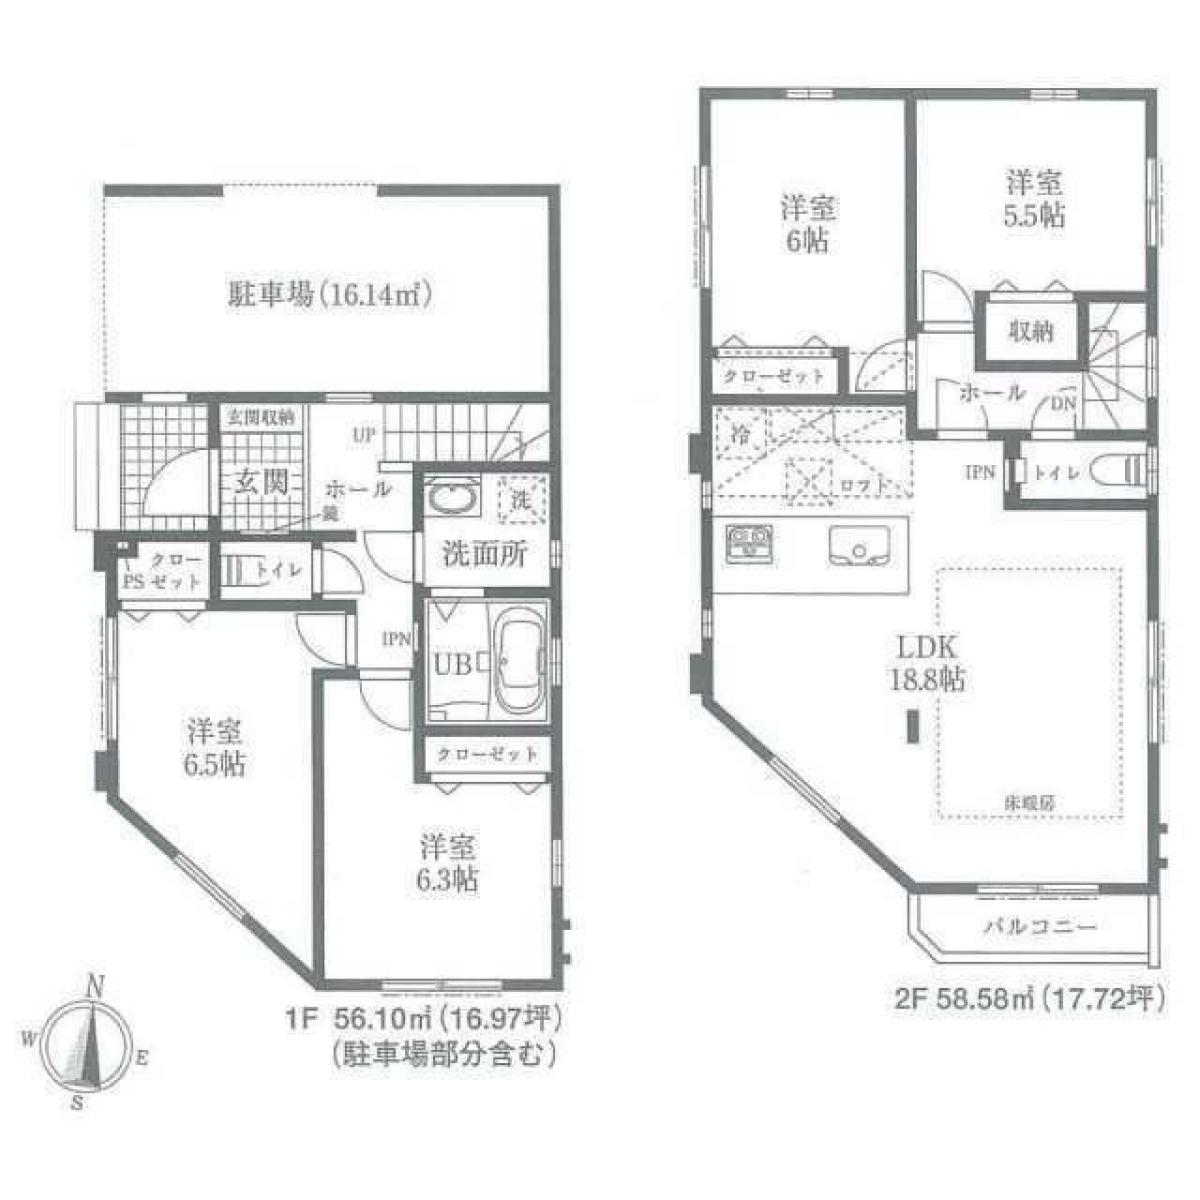 Picture of Home For Sale in Suginami Ku, Tokyo, Japan